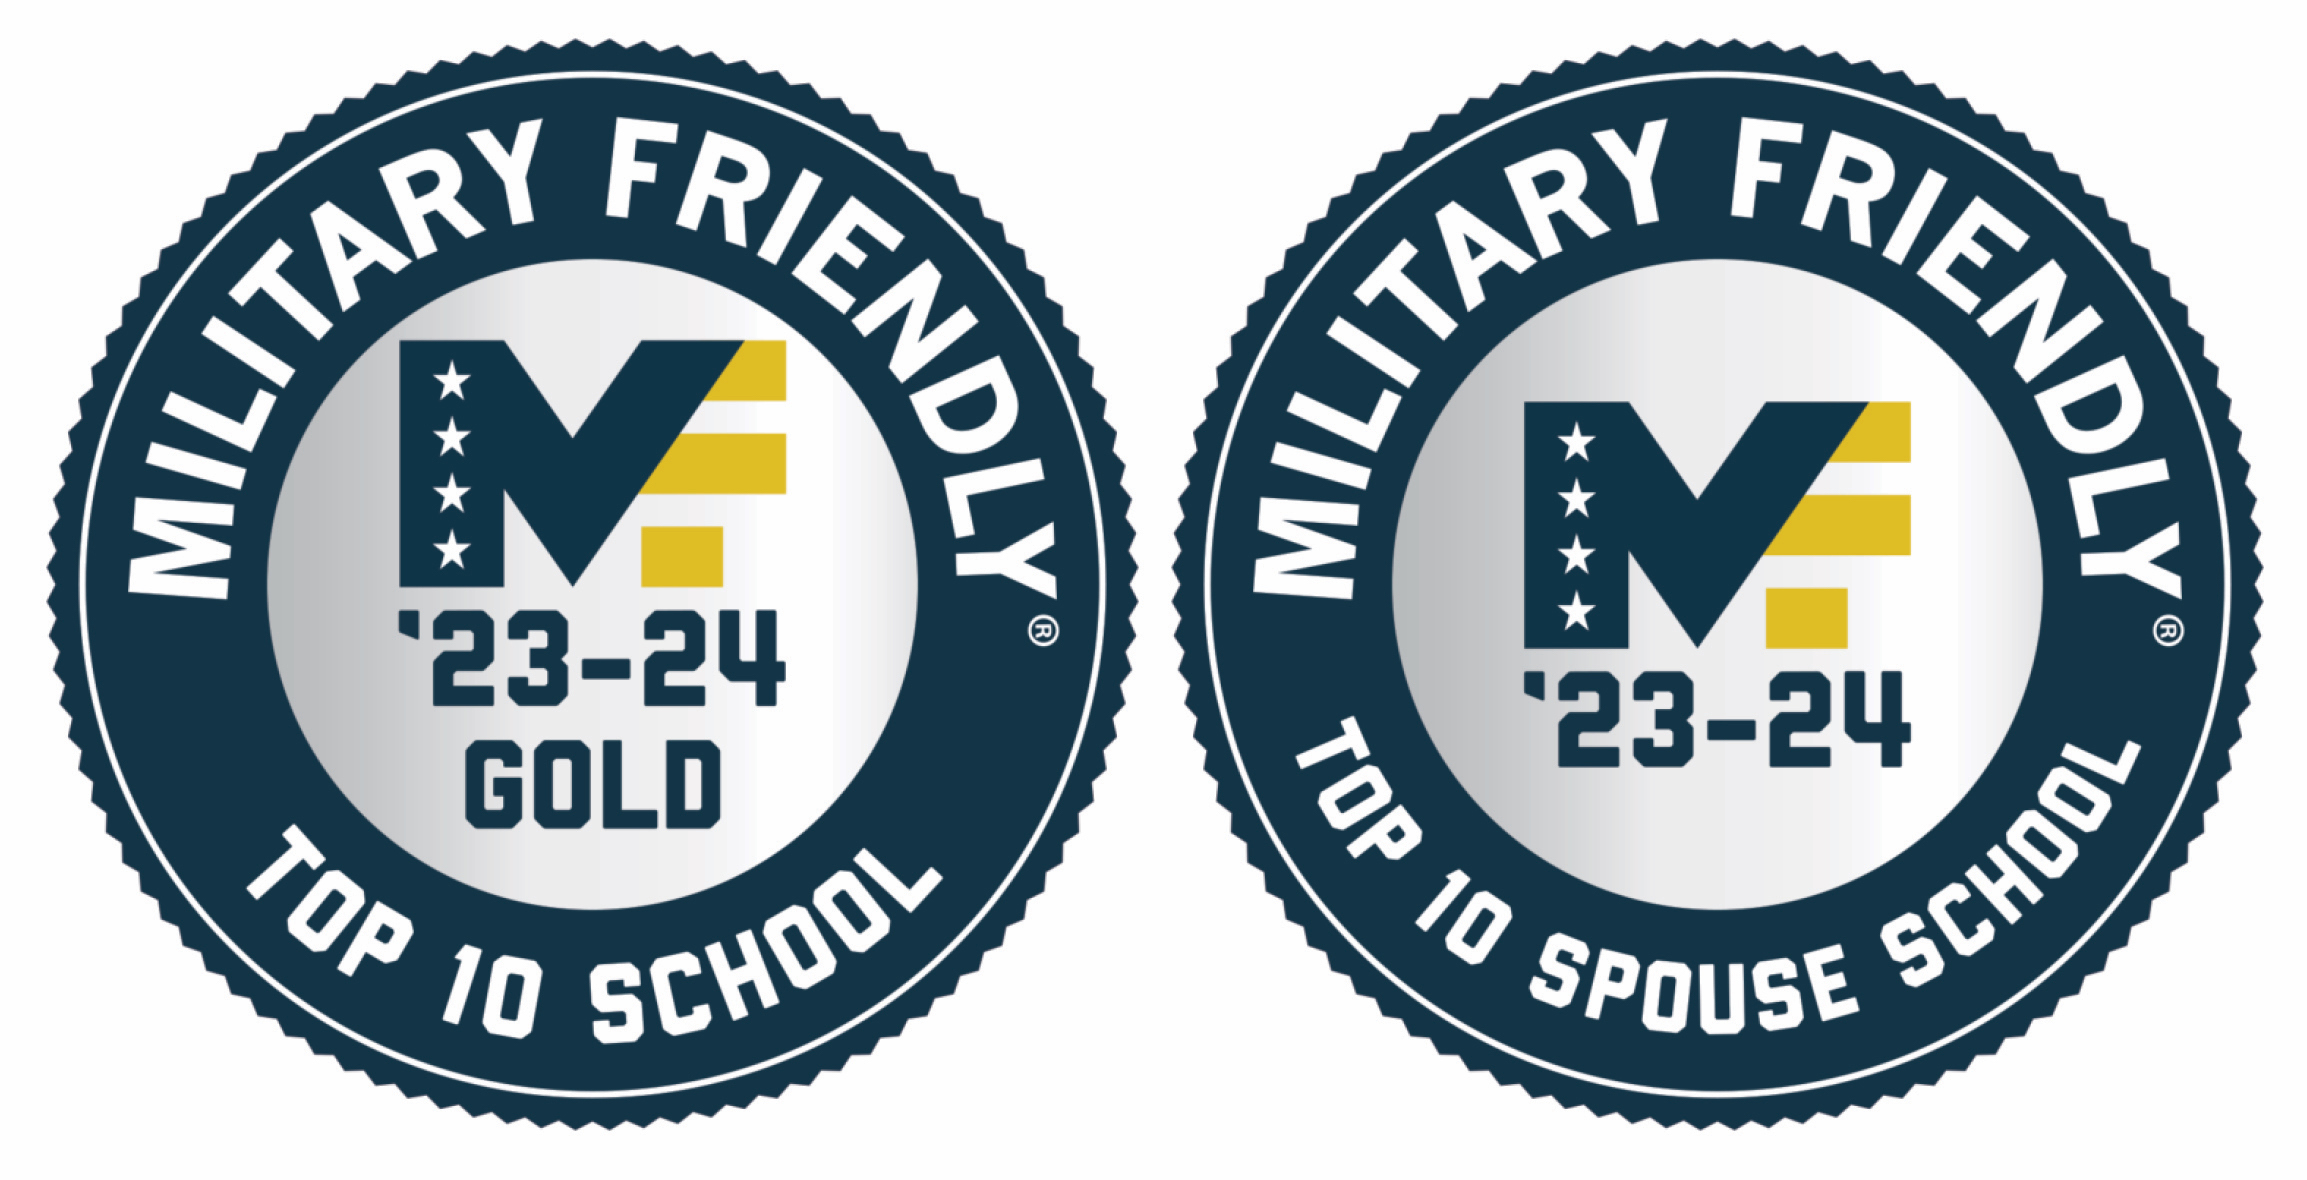 Military Friendly School Top 10 logo and Military Spouse Friendly School Top 10 logo